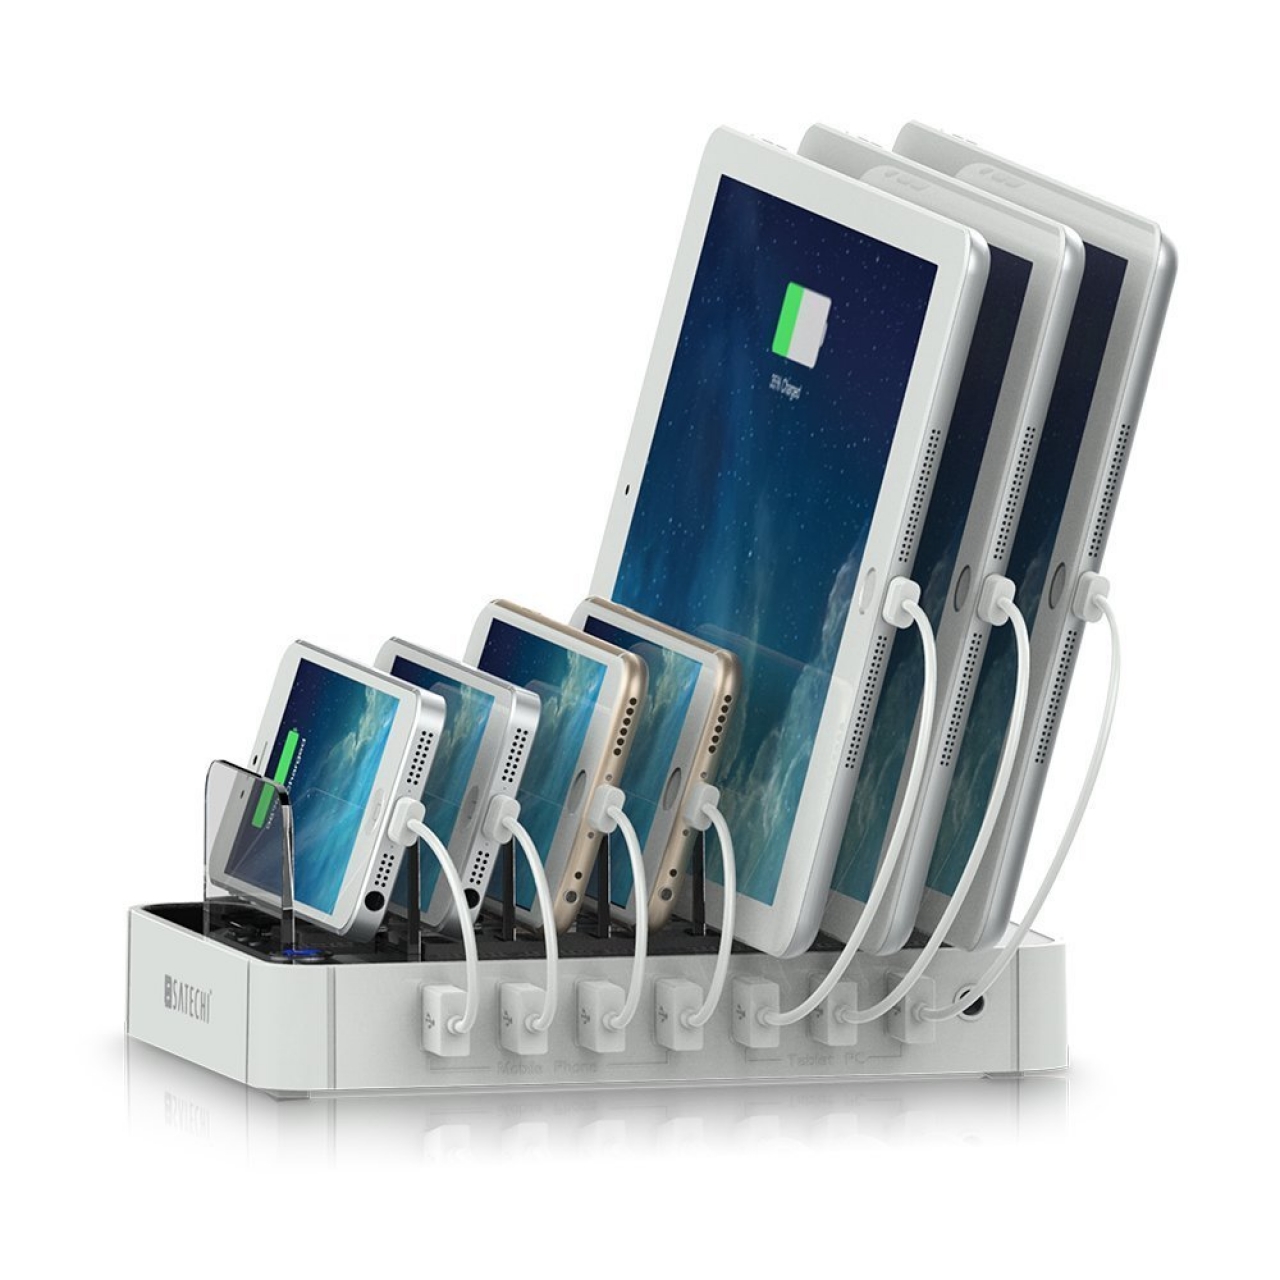 Satechi 7-Port Charging Station Dock for iPhone, (White) -